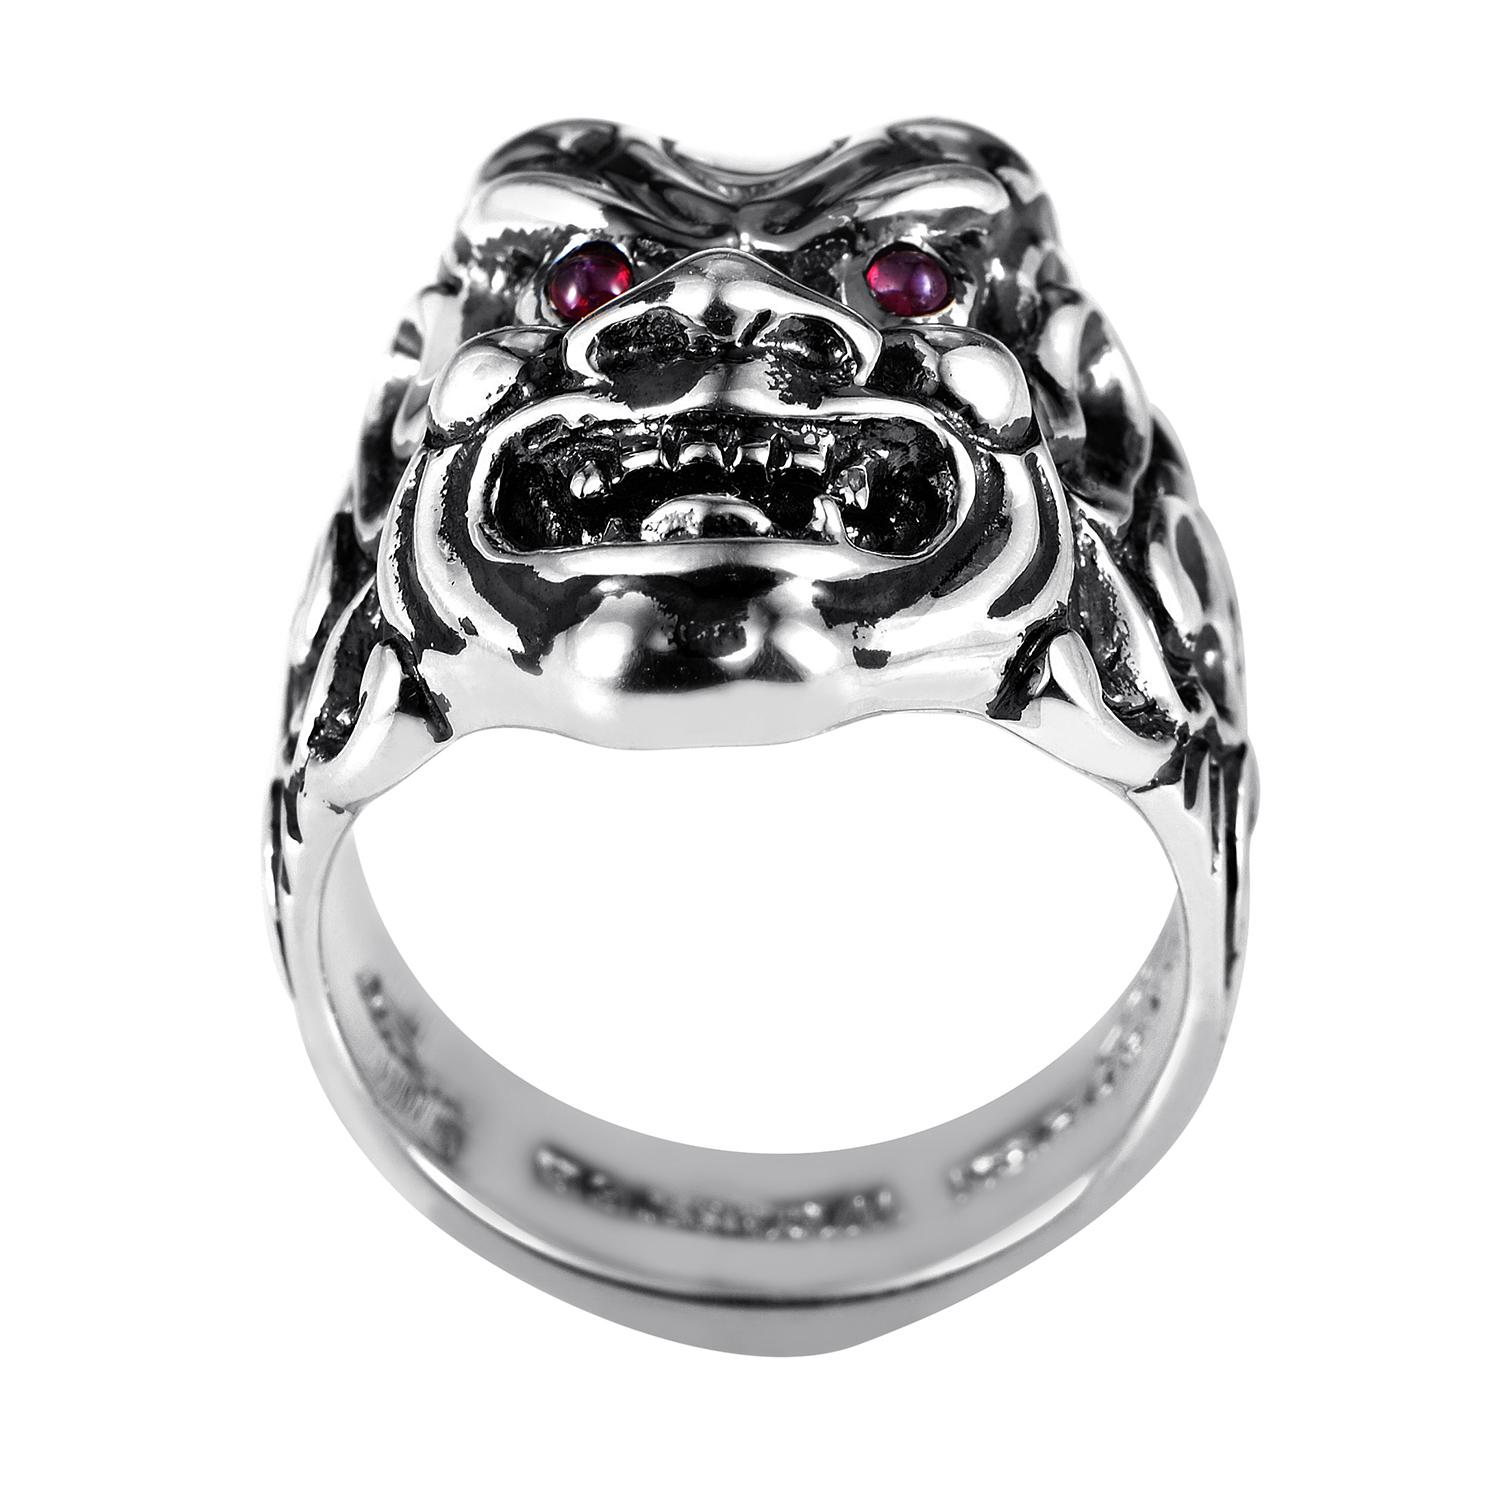 Classic becomes modern with this distinctly masculine men's ring by Stephen Webster. The bold Japanese warrior mask is made of finely crafted sterling silver with smoldering cabochon ruby eyes totaling 0.13ct for a somber but stylish finish.<br/>22